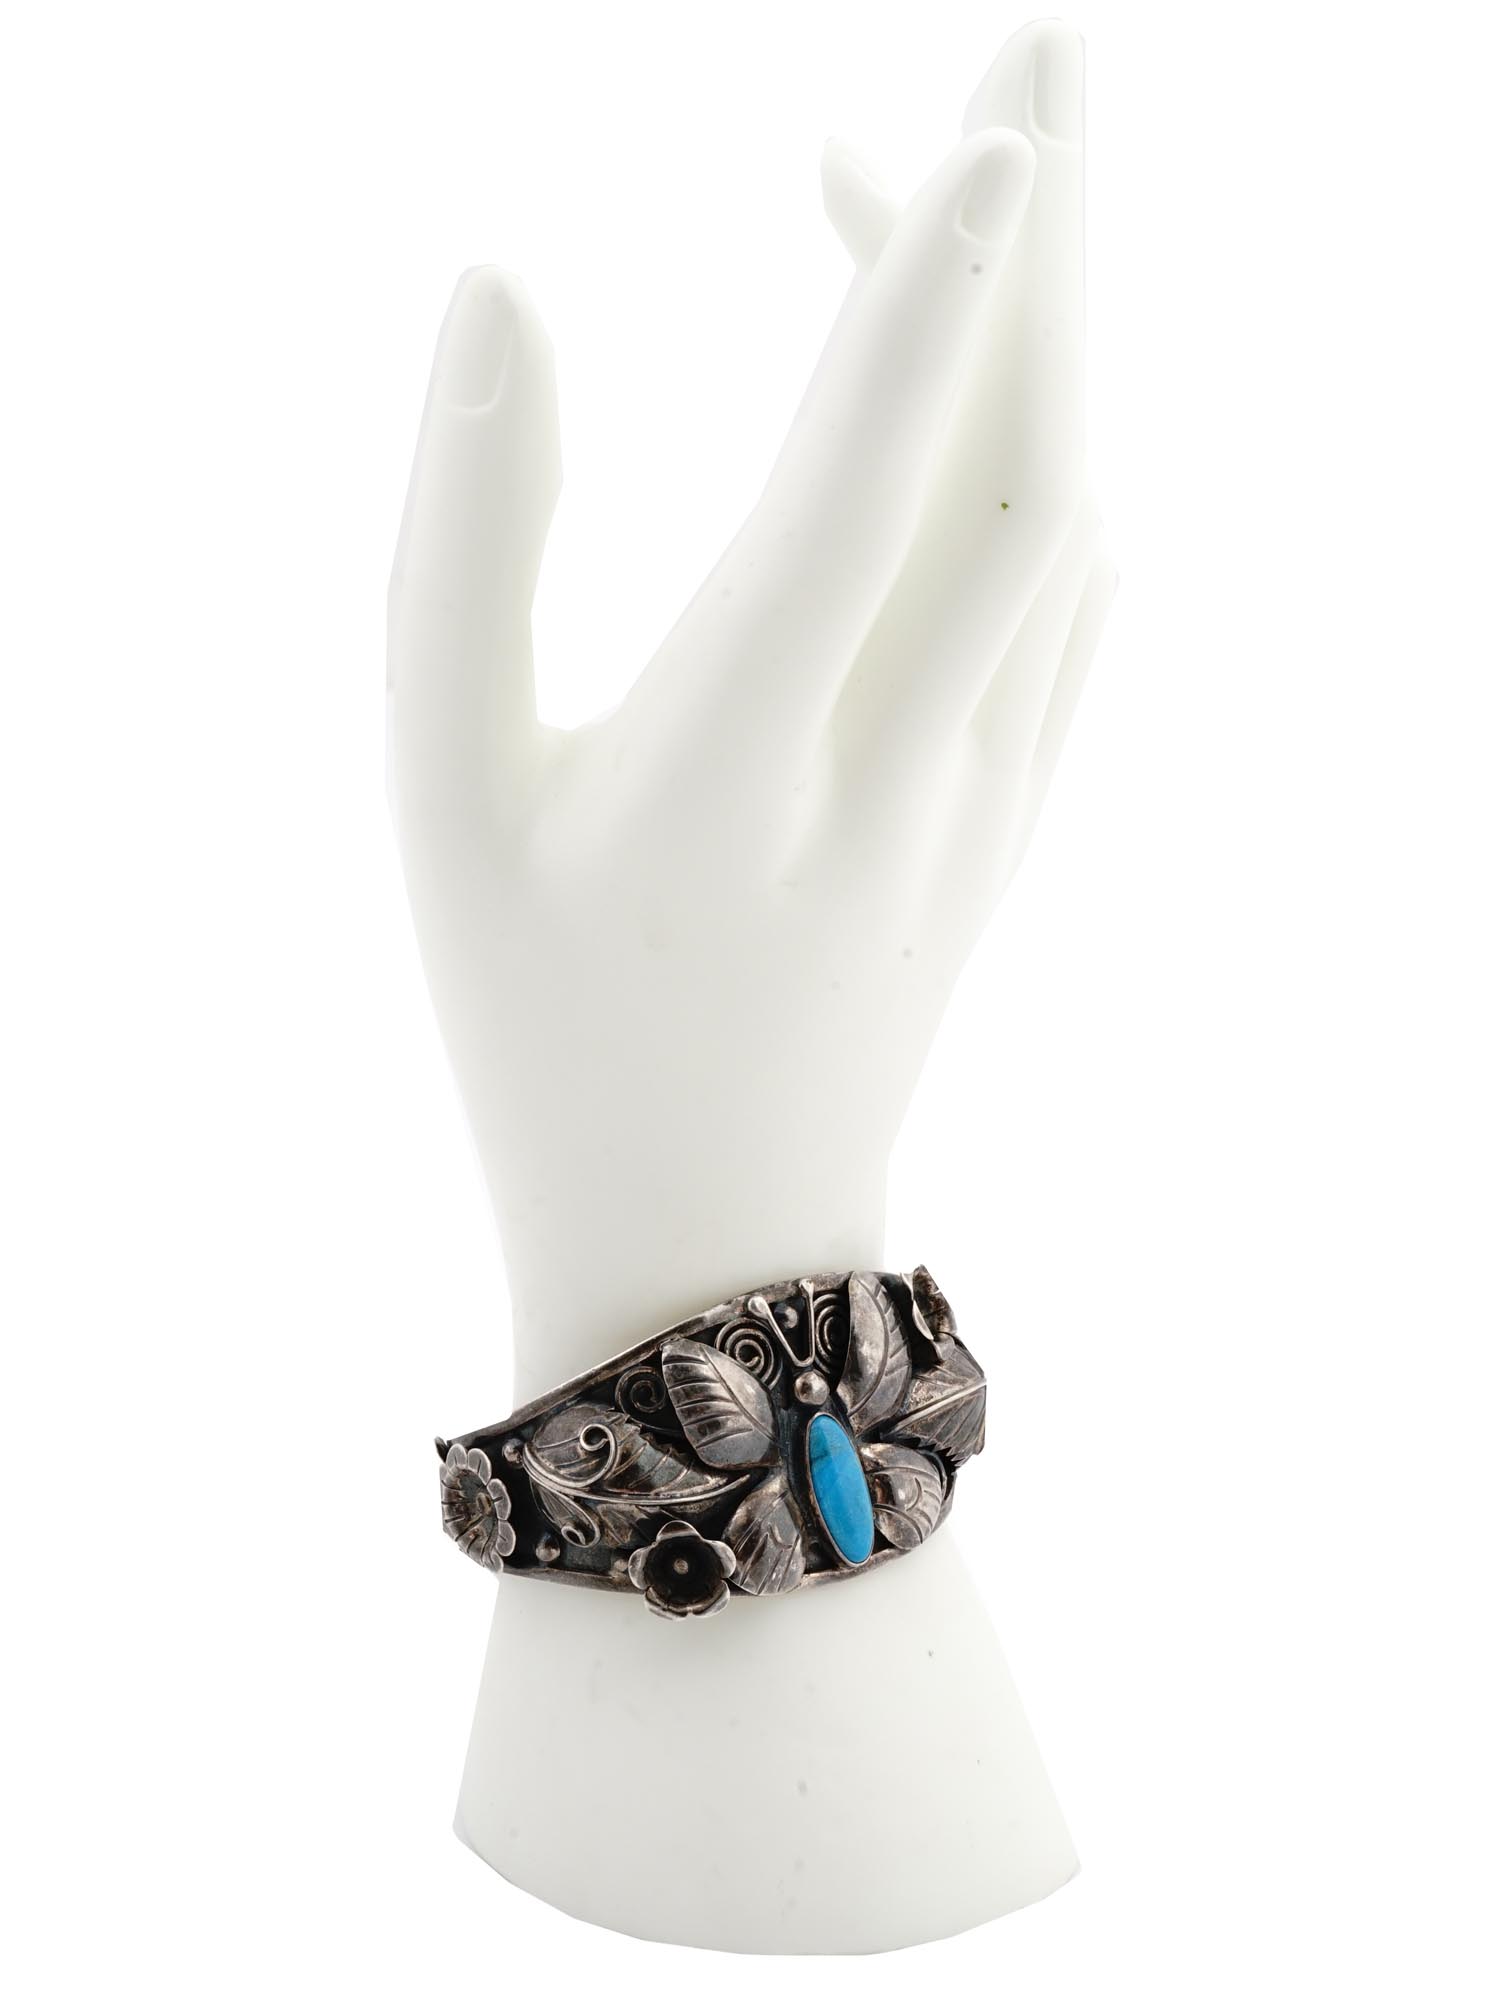 VTG AMERICAN NAVAJO STYLE SILVER TURQUOISE CUFF BANGLE PIC-2